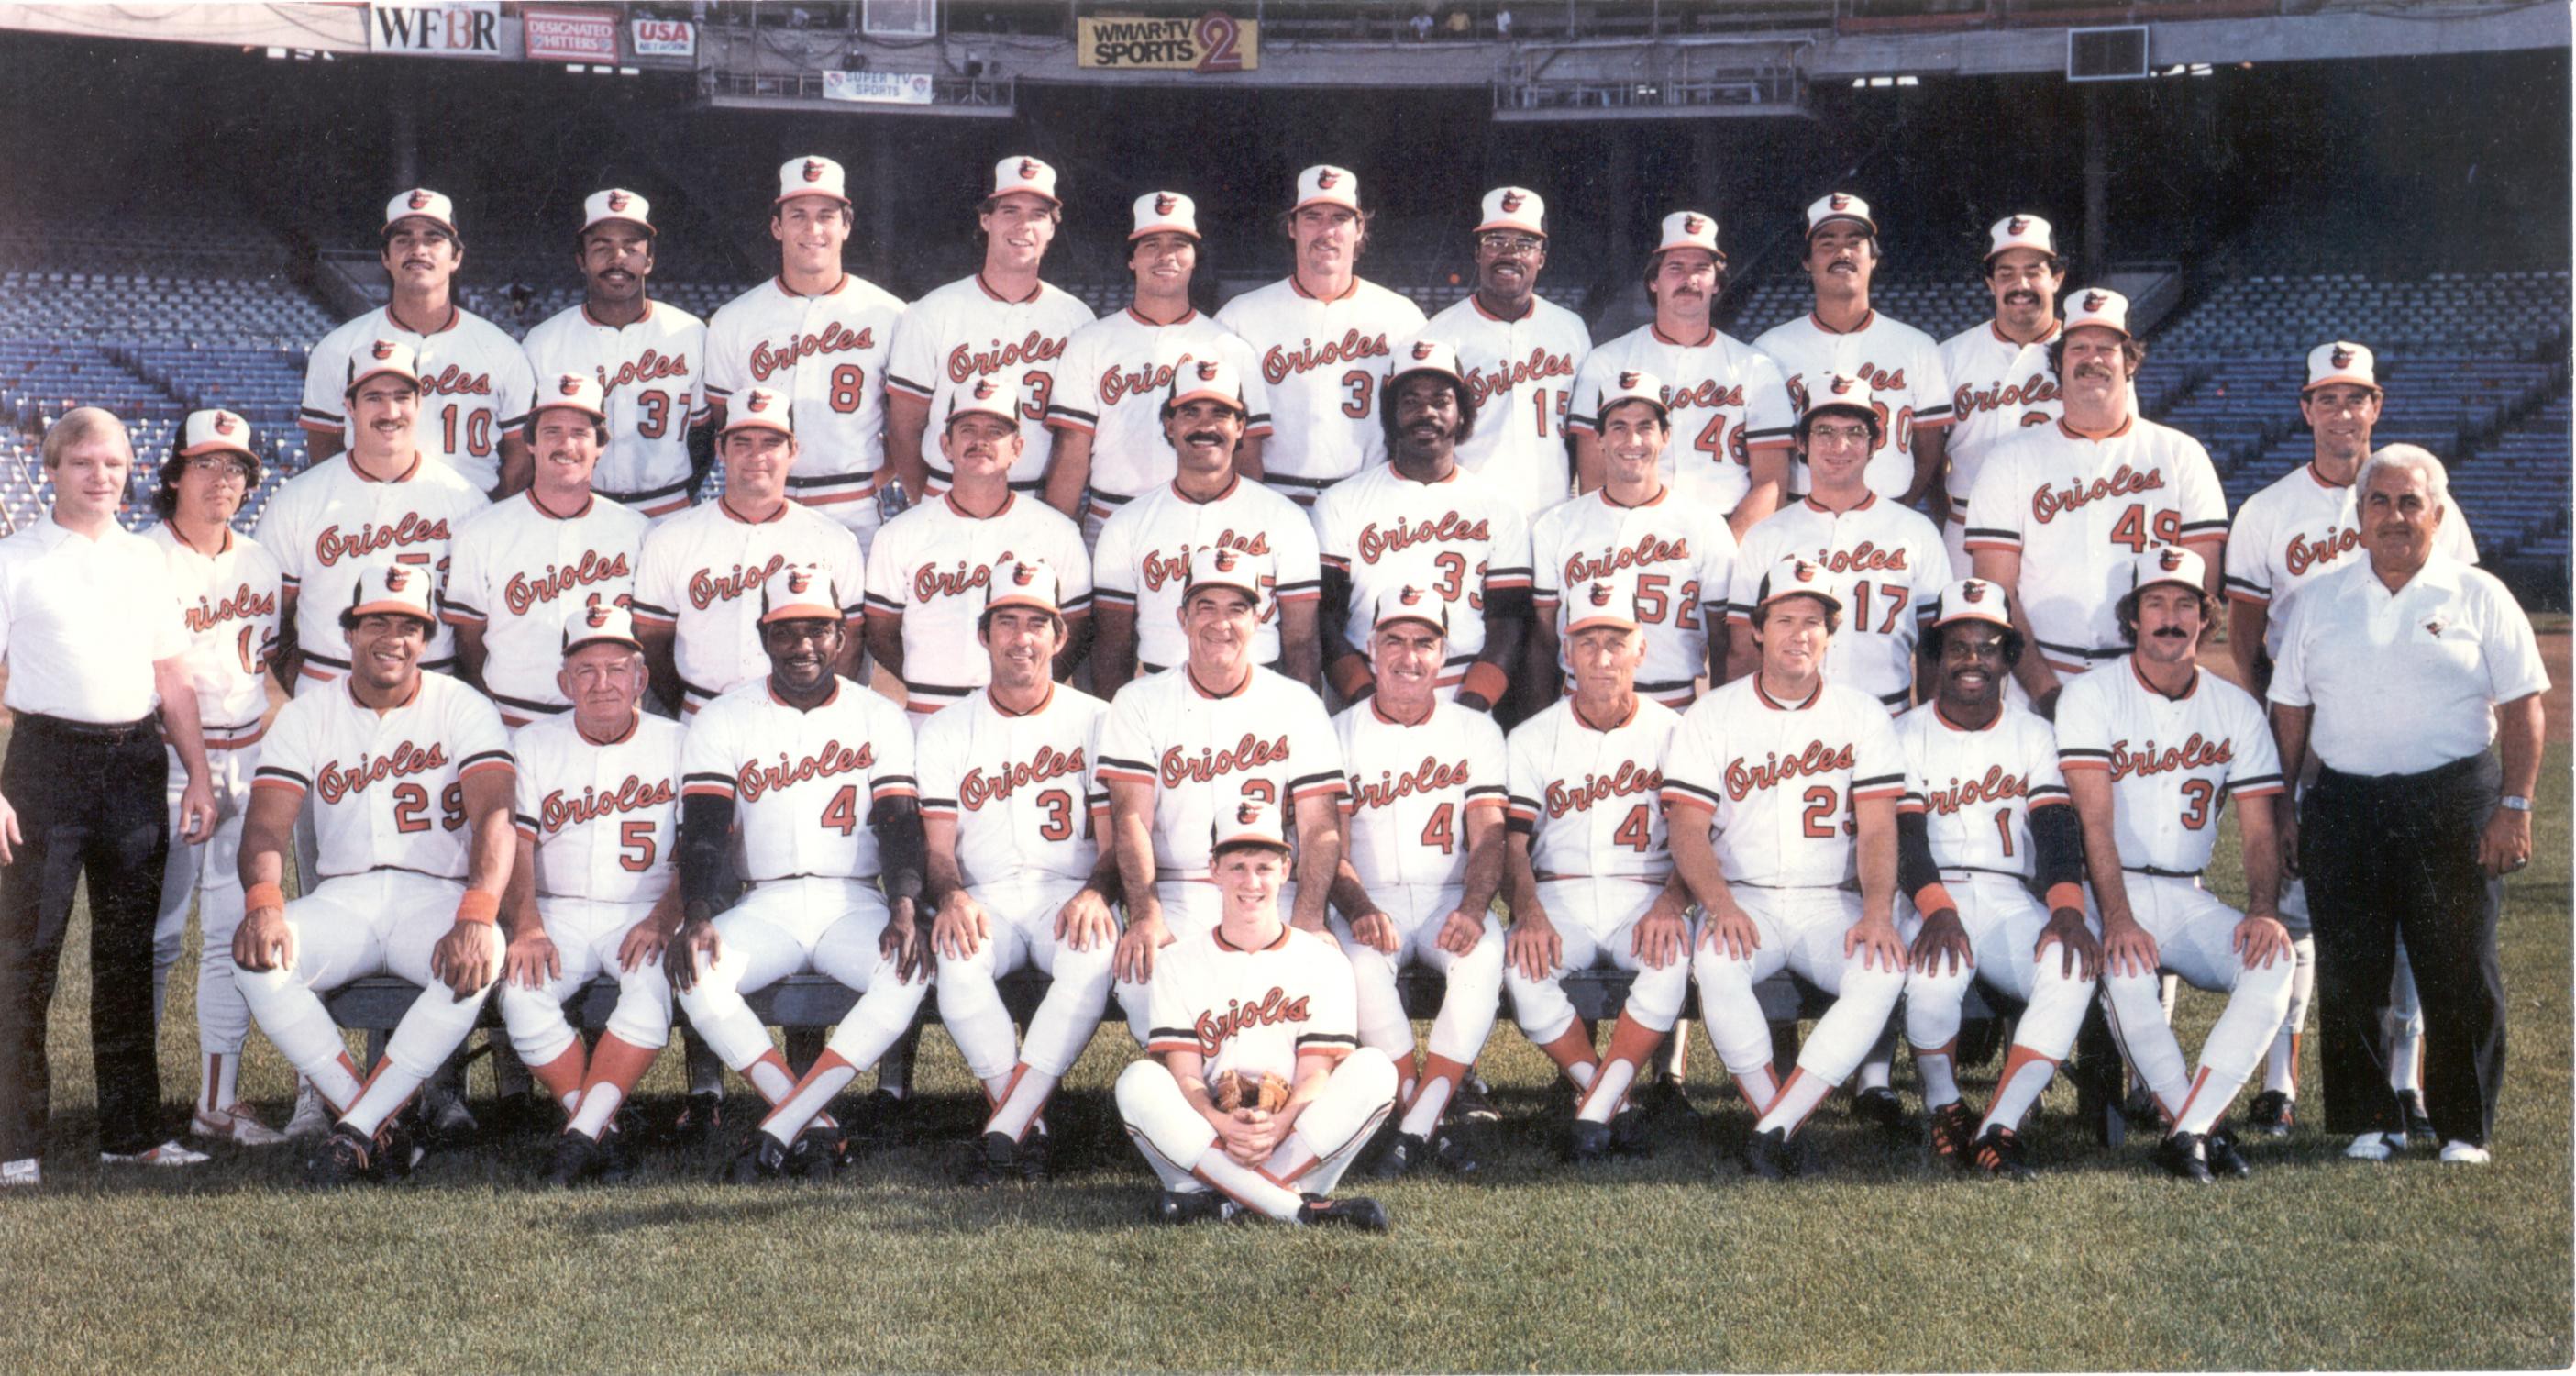 1983 WS Gm5: Orioles win the 1983 World Series 